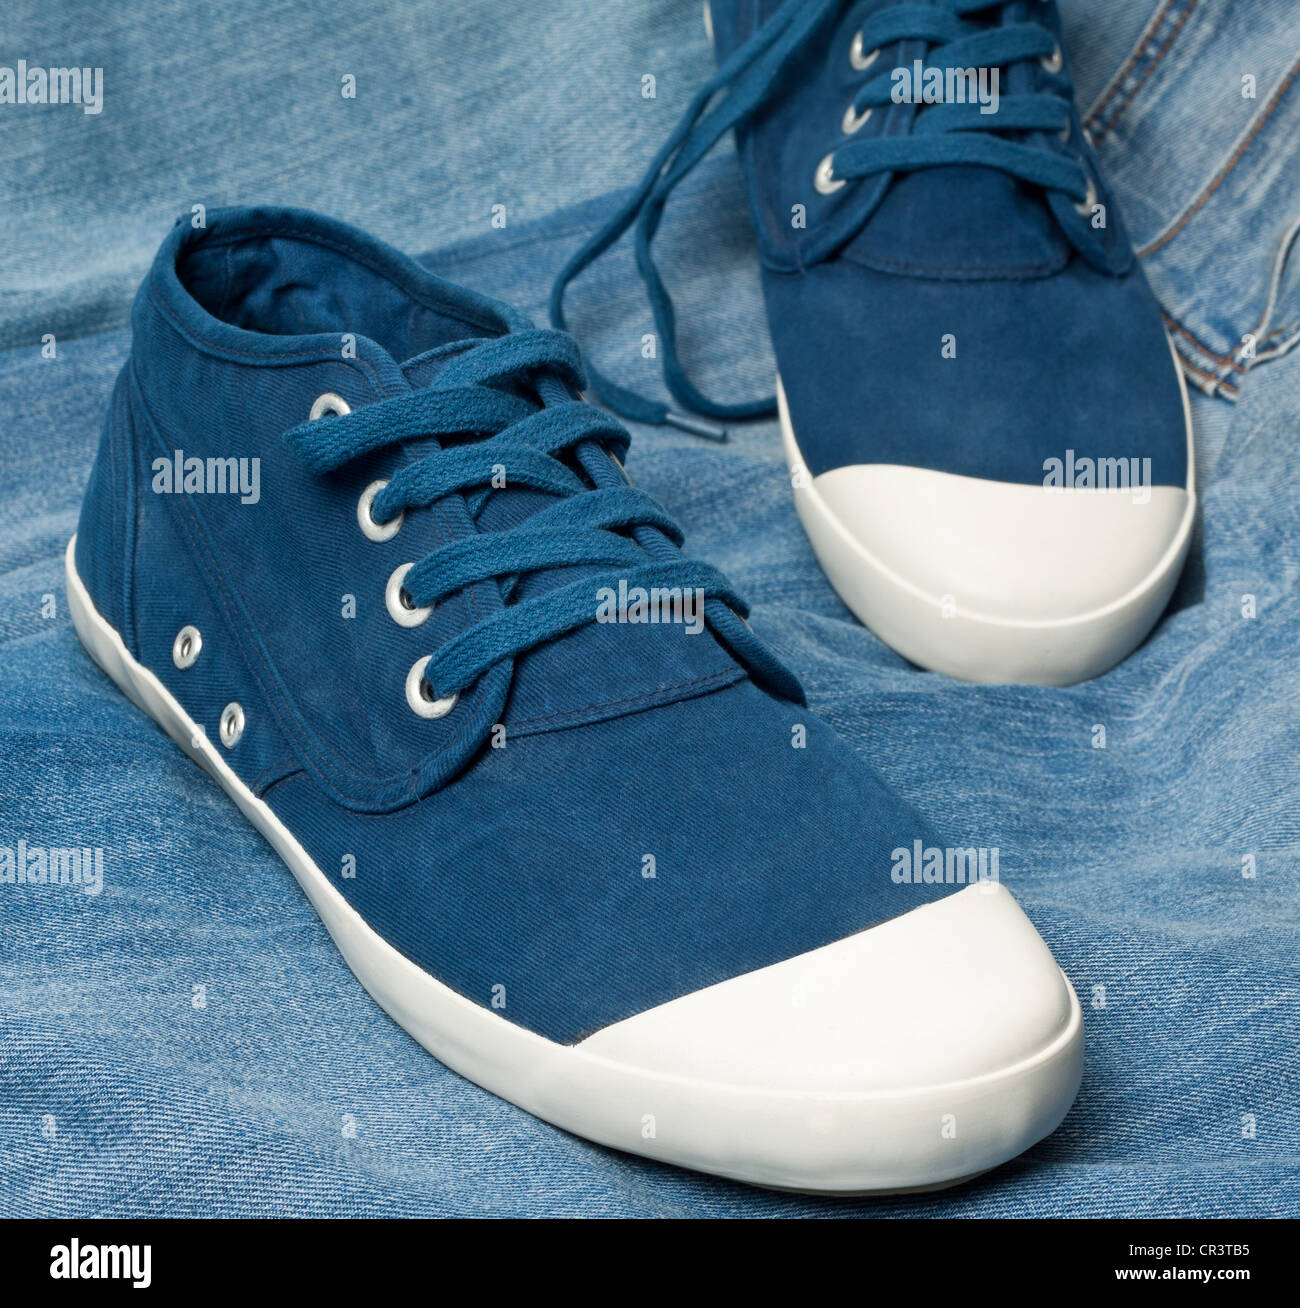 Pair of new blue shoes Stock Photo